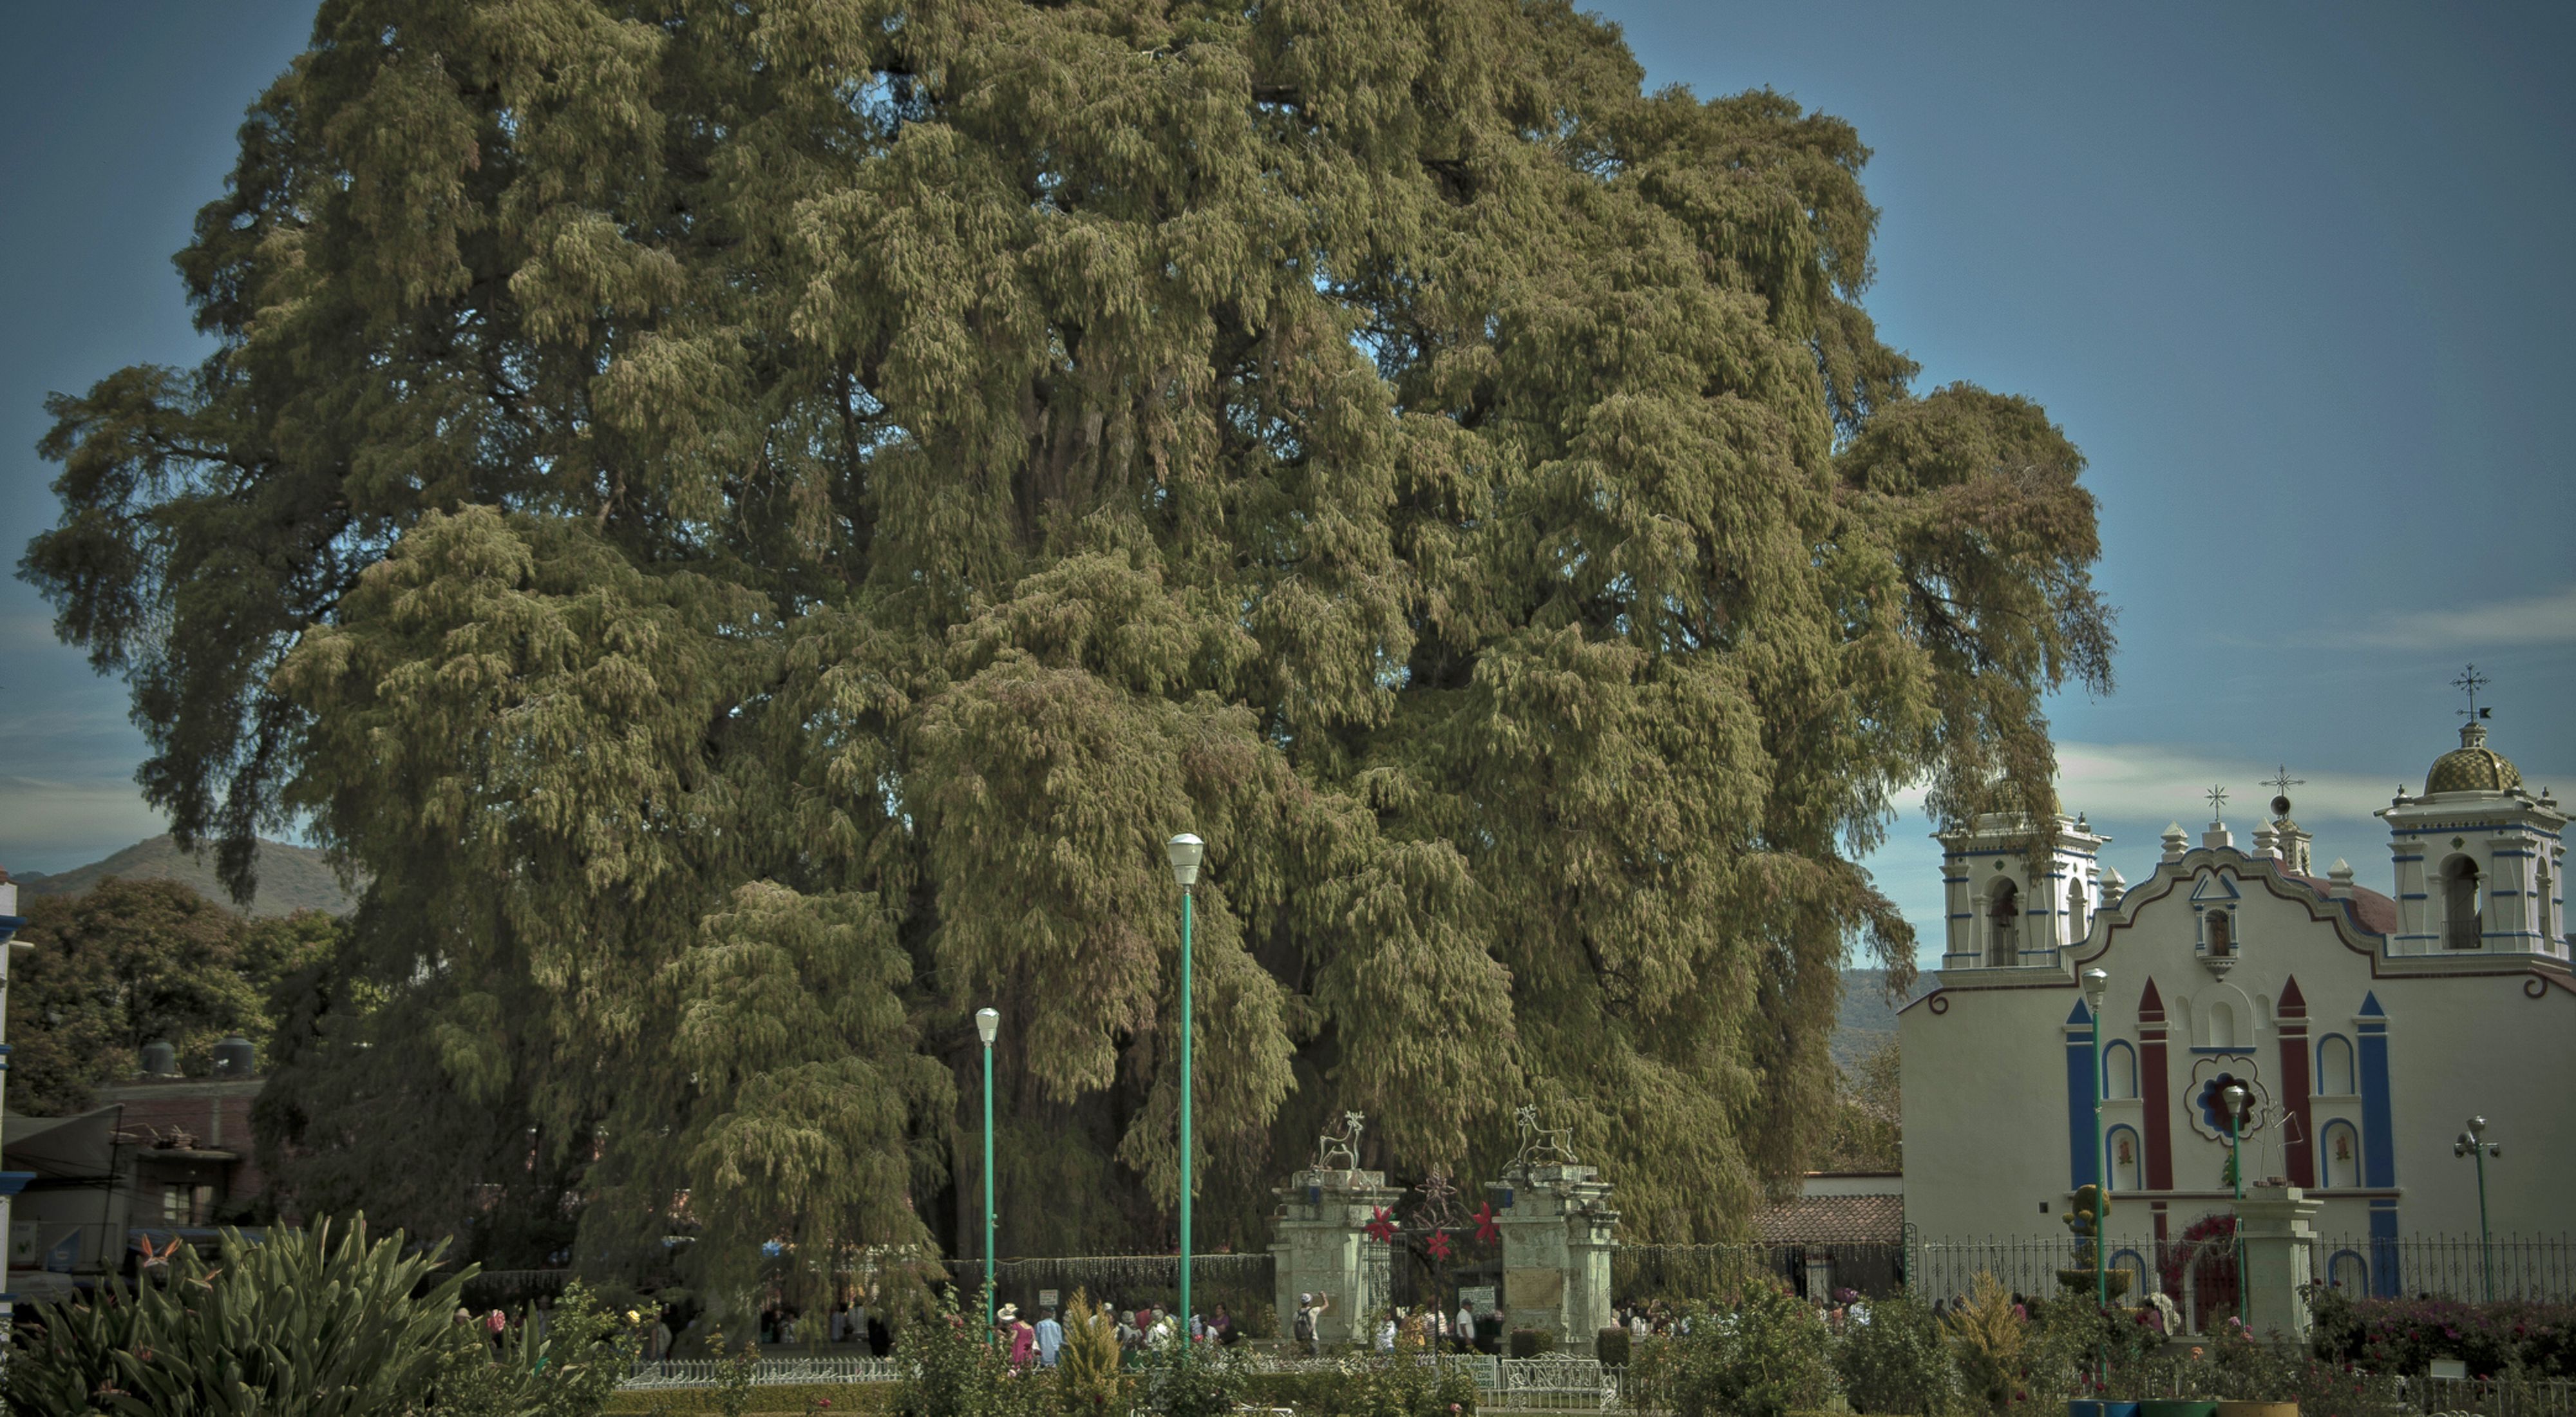 Branches from a massive Montezuma cypress tree extend toward the sky, nearly obscuring an ornate building next to the tree.